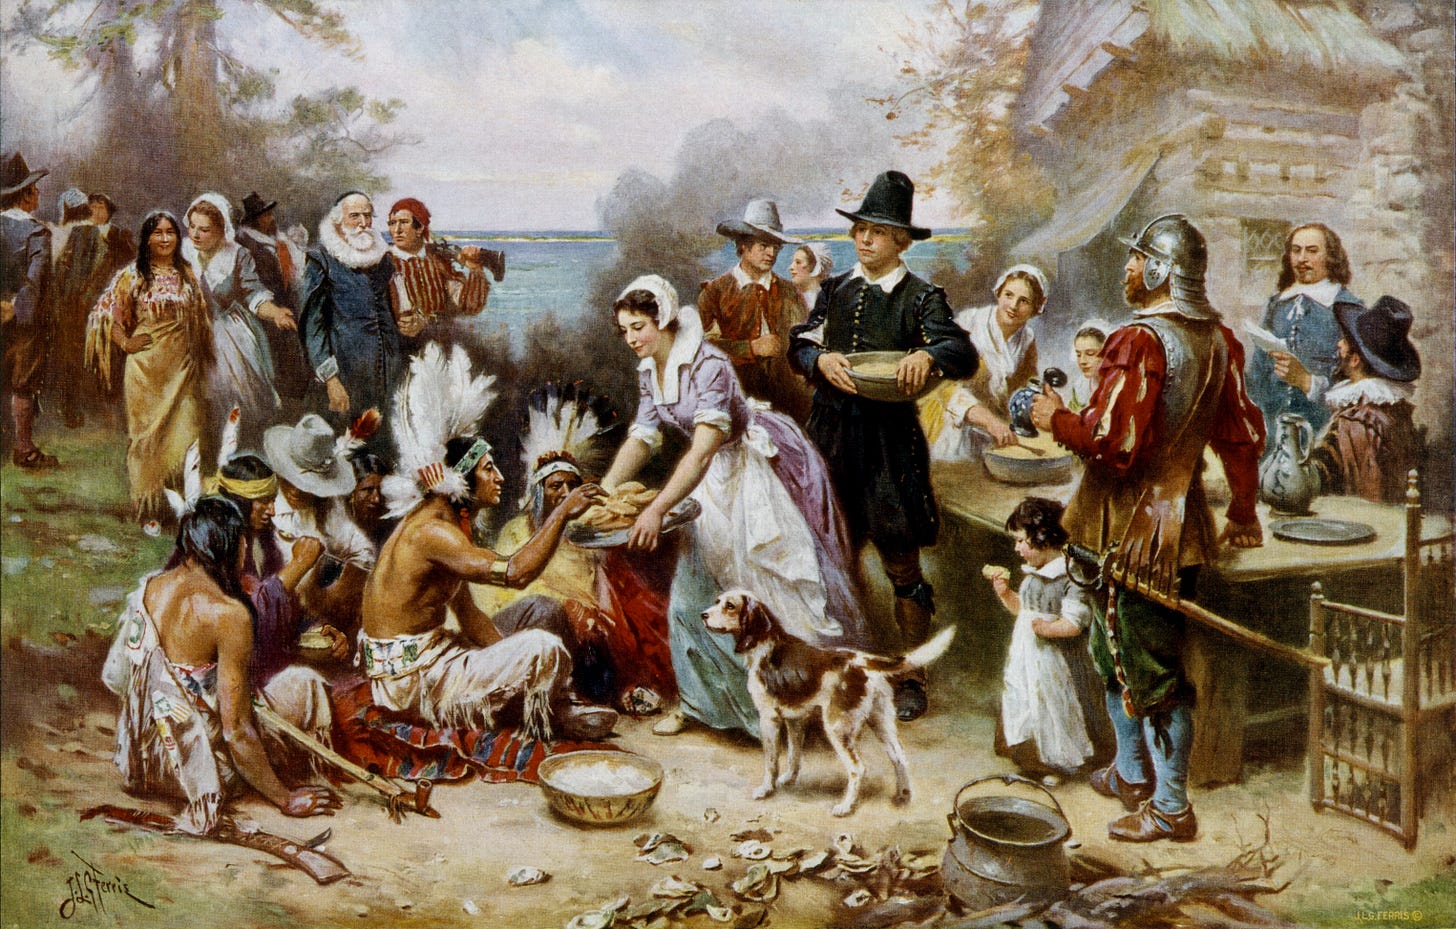 File:The First Thanksgiving cph.3g04961.jpg - Wikimedia Commons